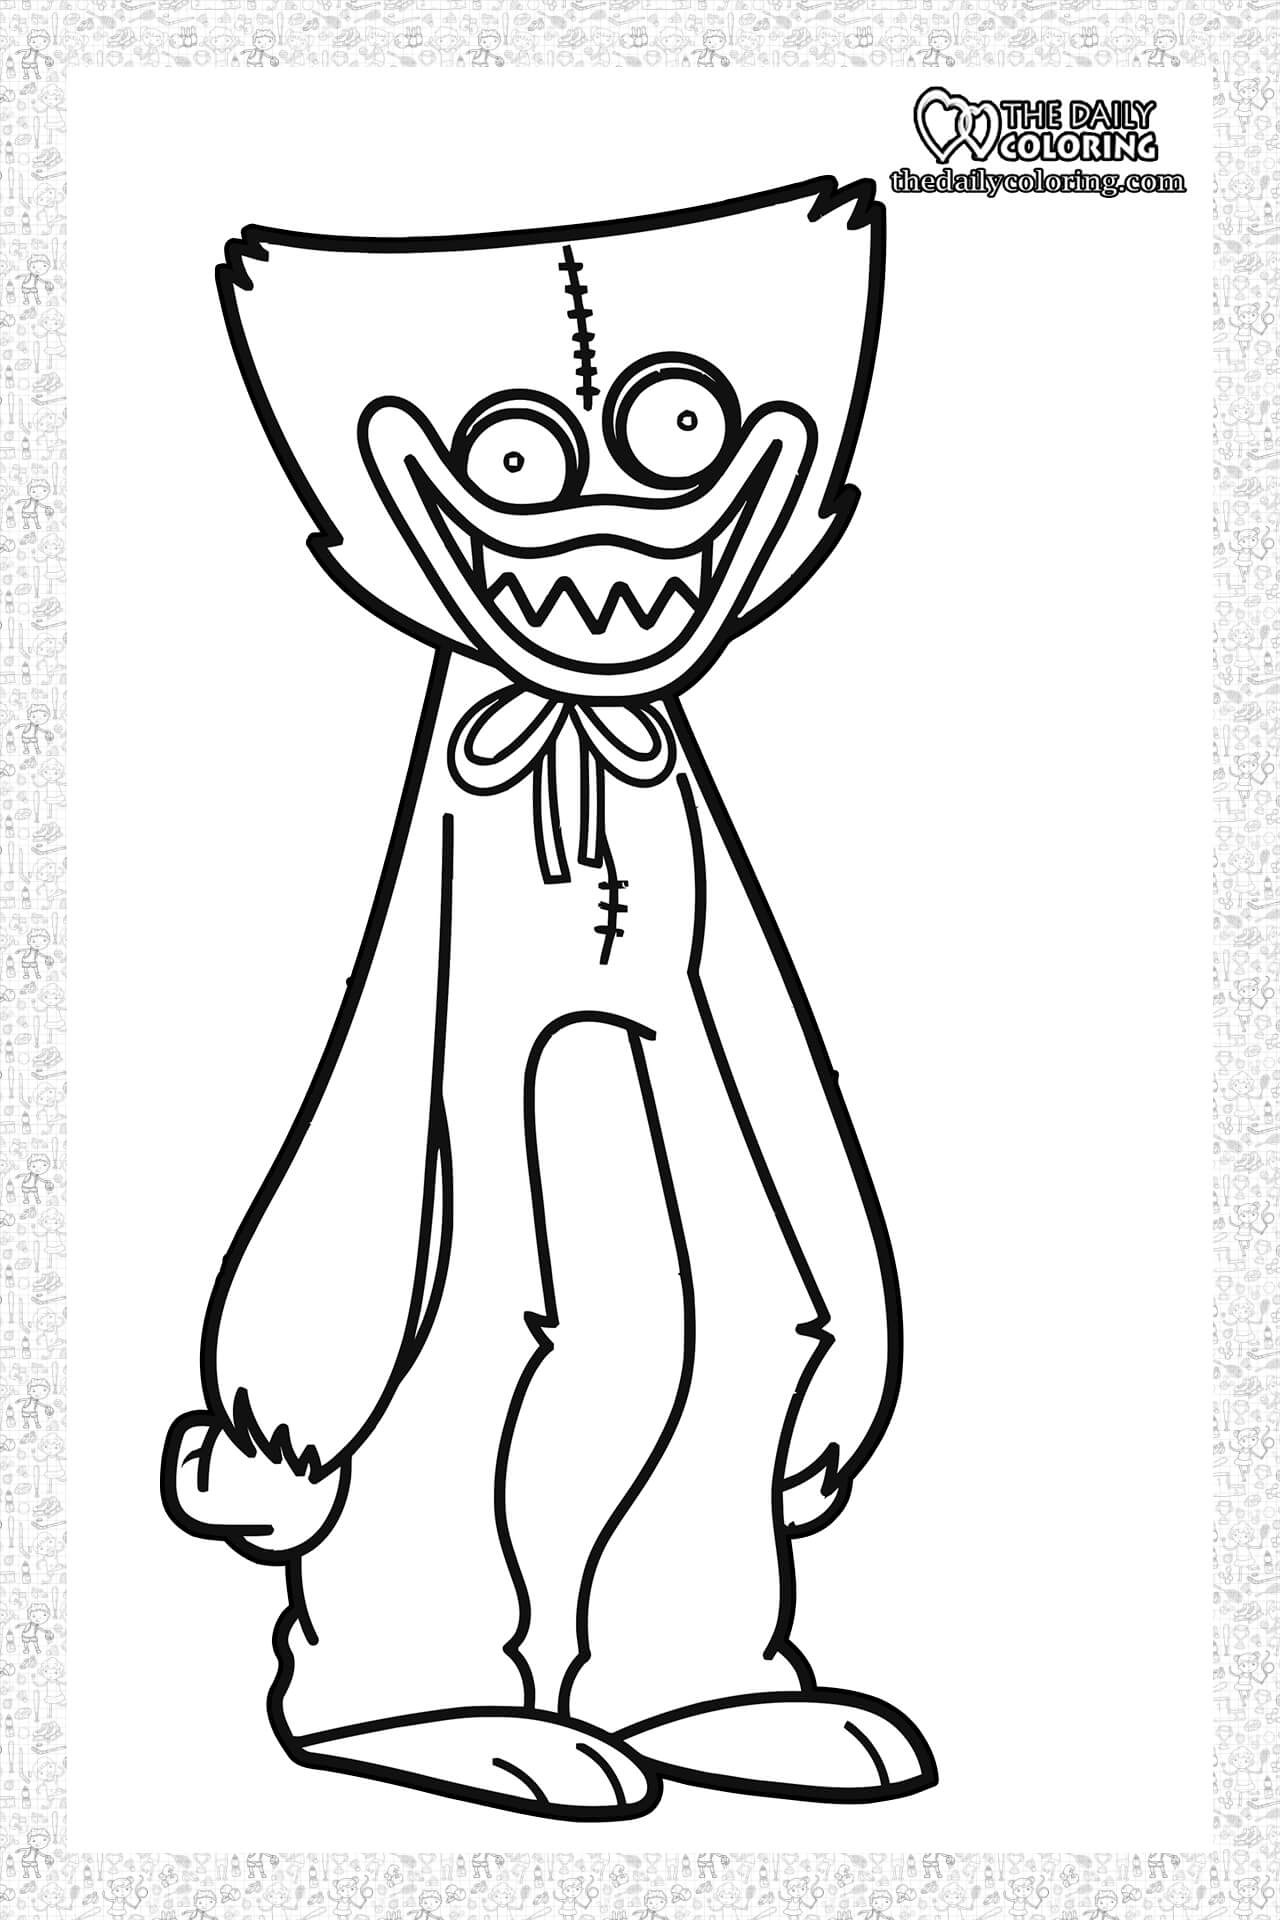 Huggy Wuggy Coloring Pages - The Daily Coloring